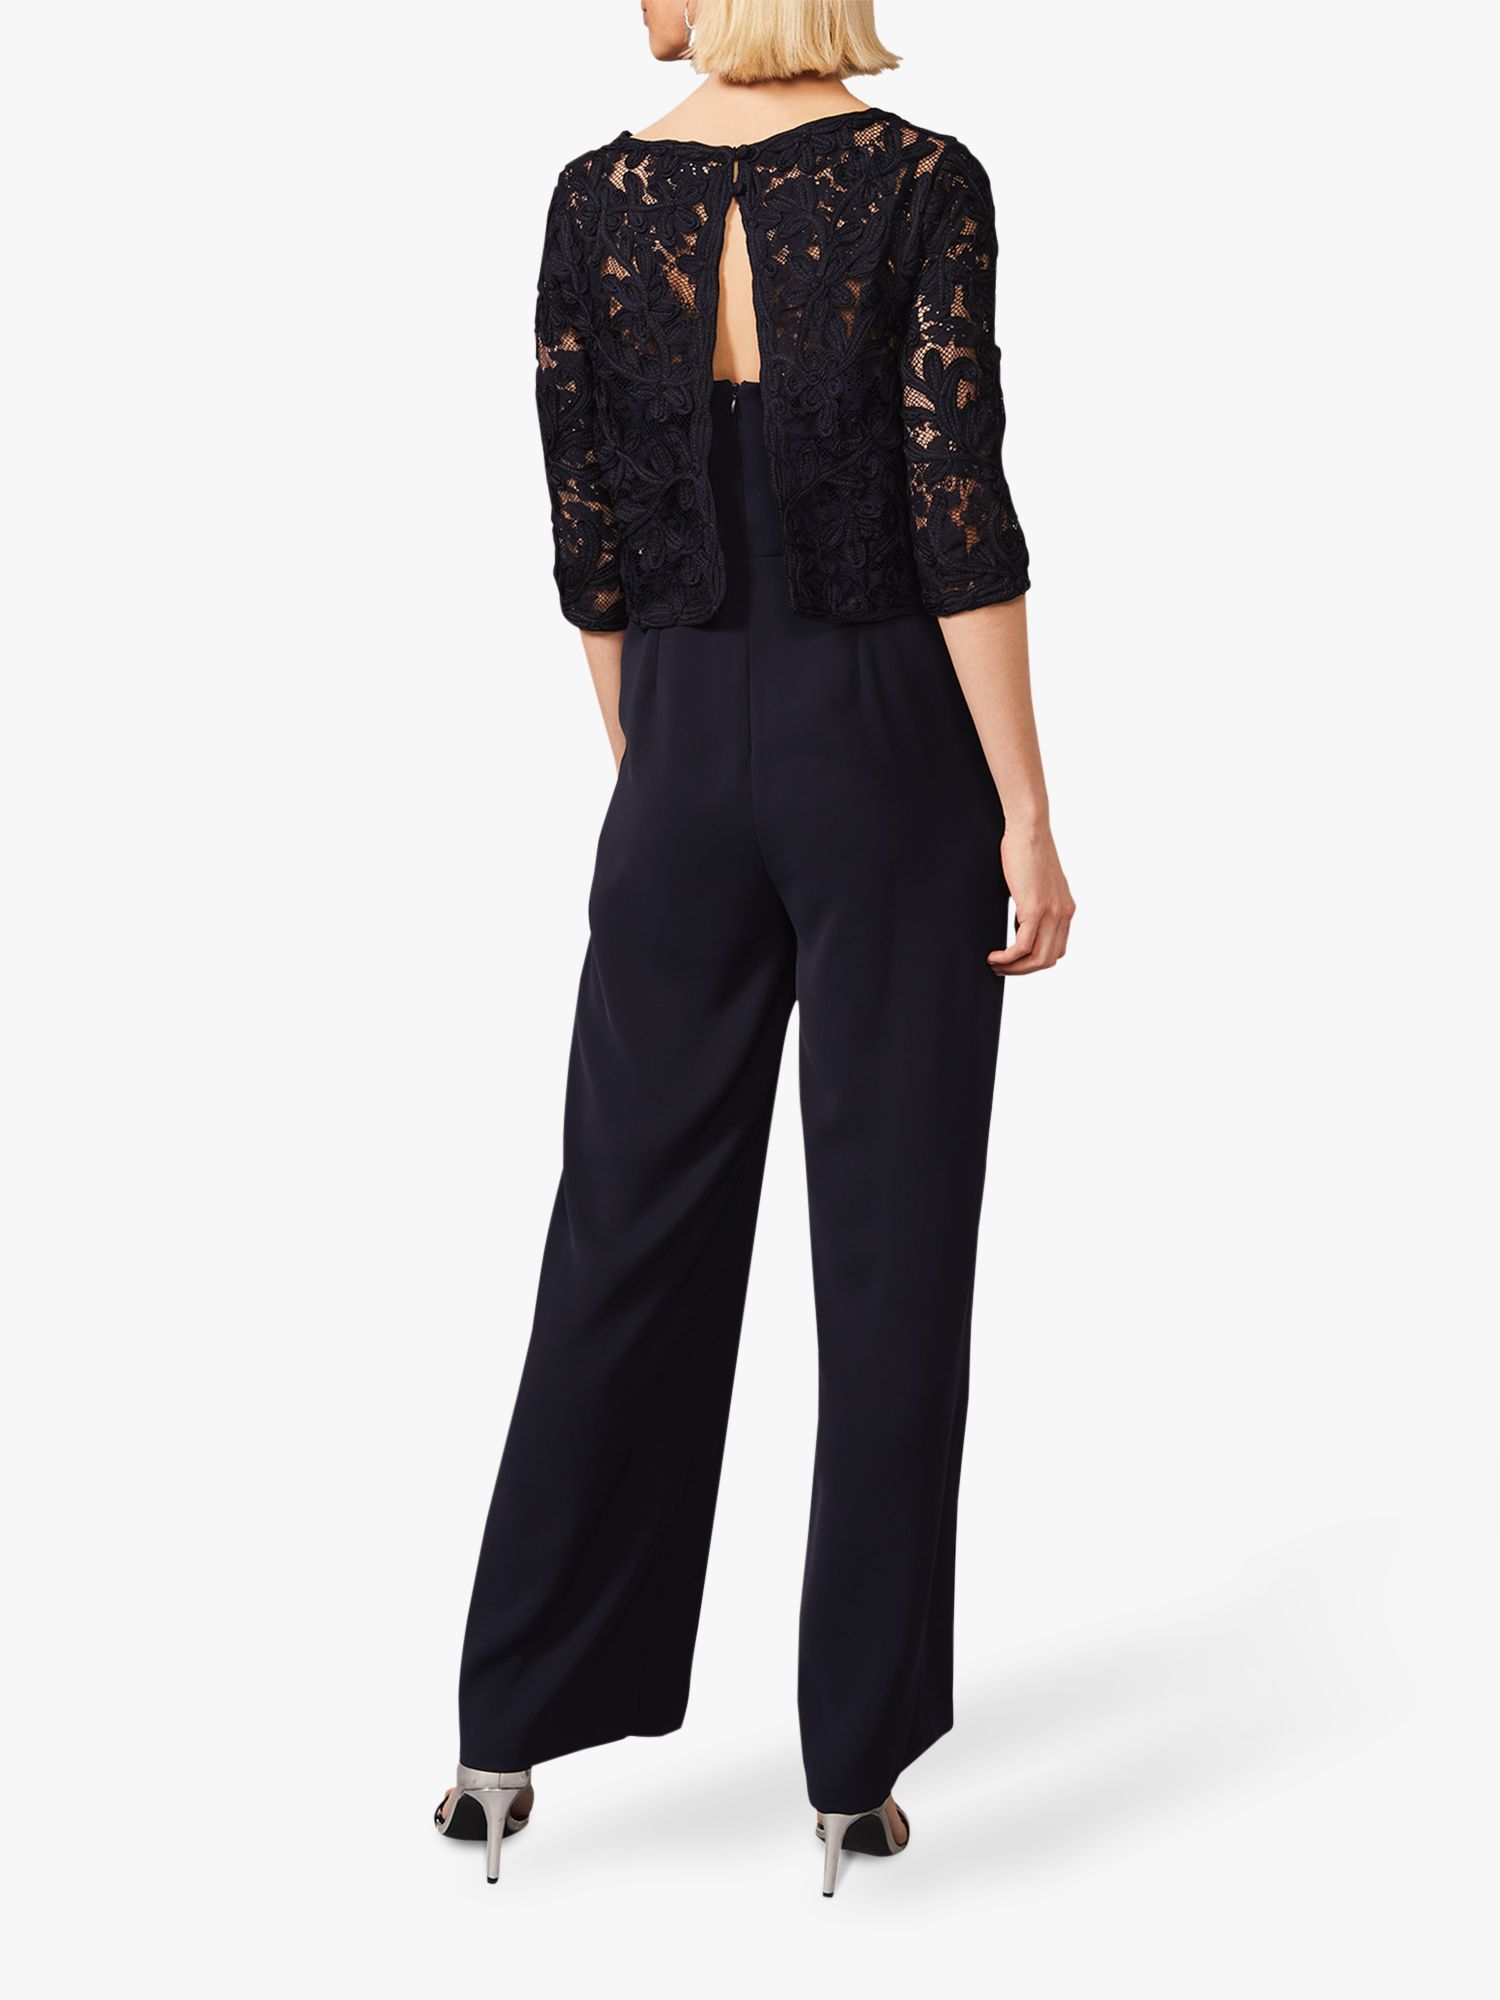 Phase Eight Elodie Wide Leg Lace Overlay Jumpsuit, Navy